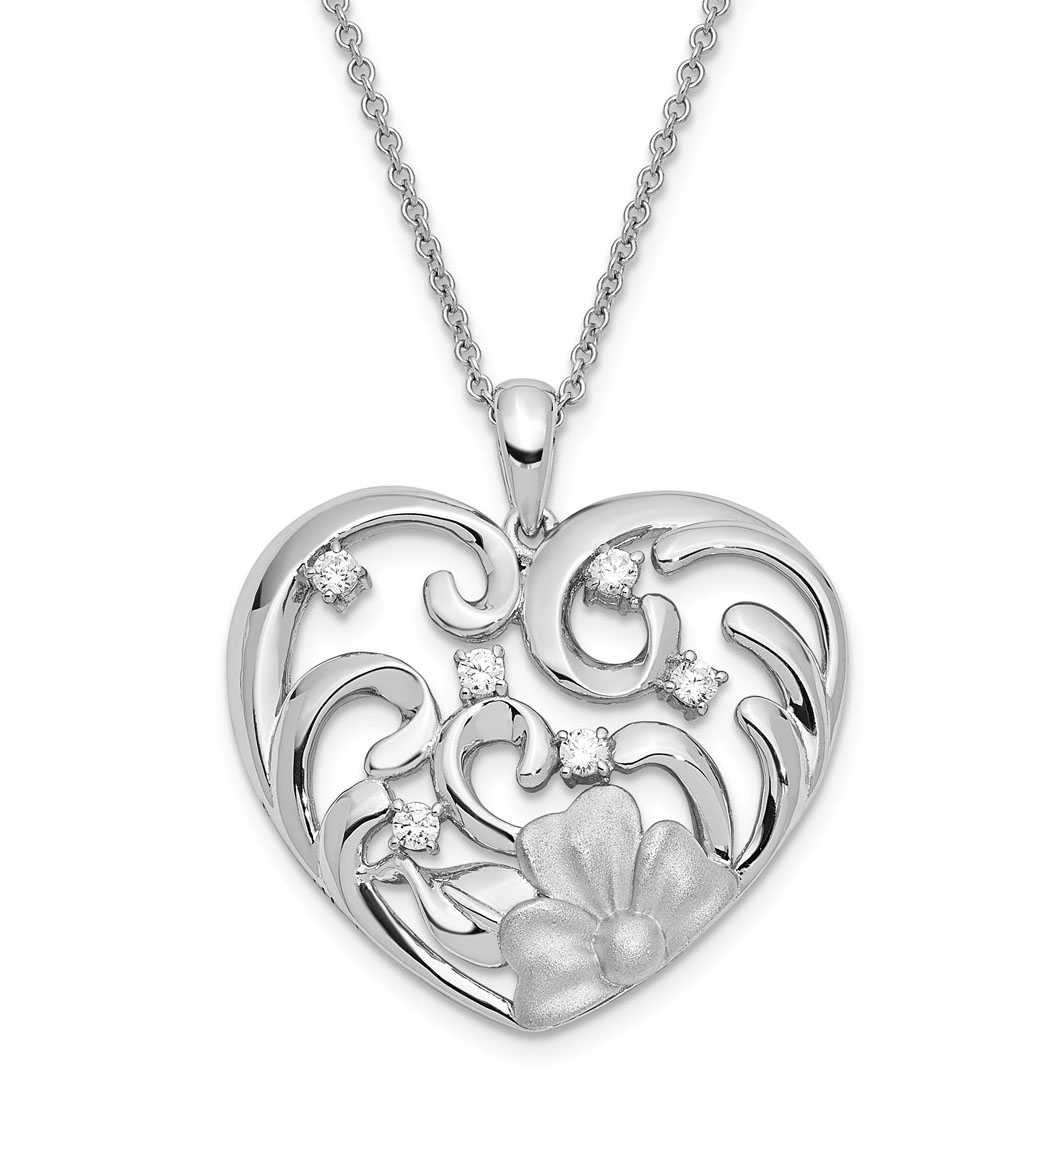 'She Is Beautiful' CZ Antiqued Satin Finish Heart Pendant Necklace, Rhodium-Plated Sterling Silver.